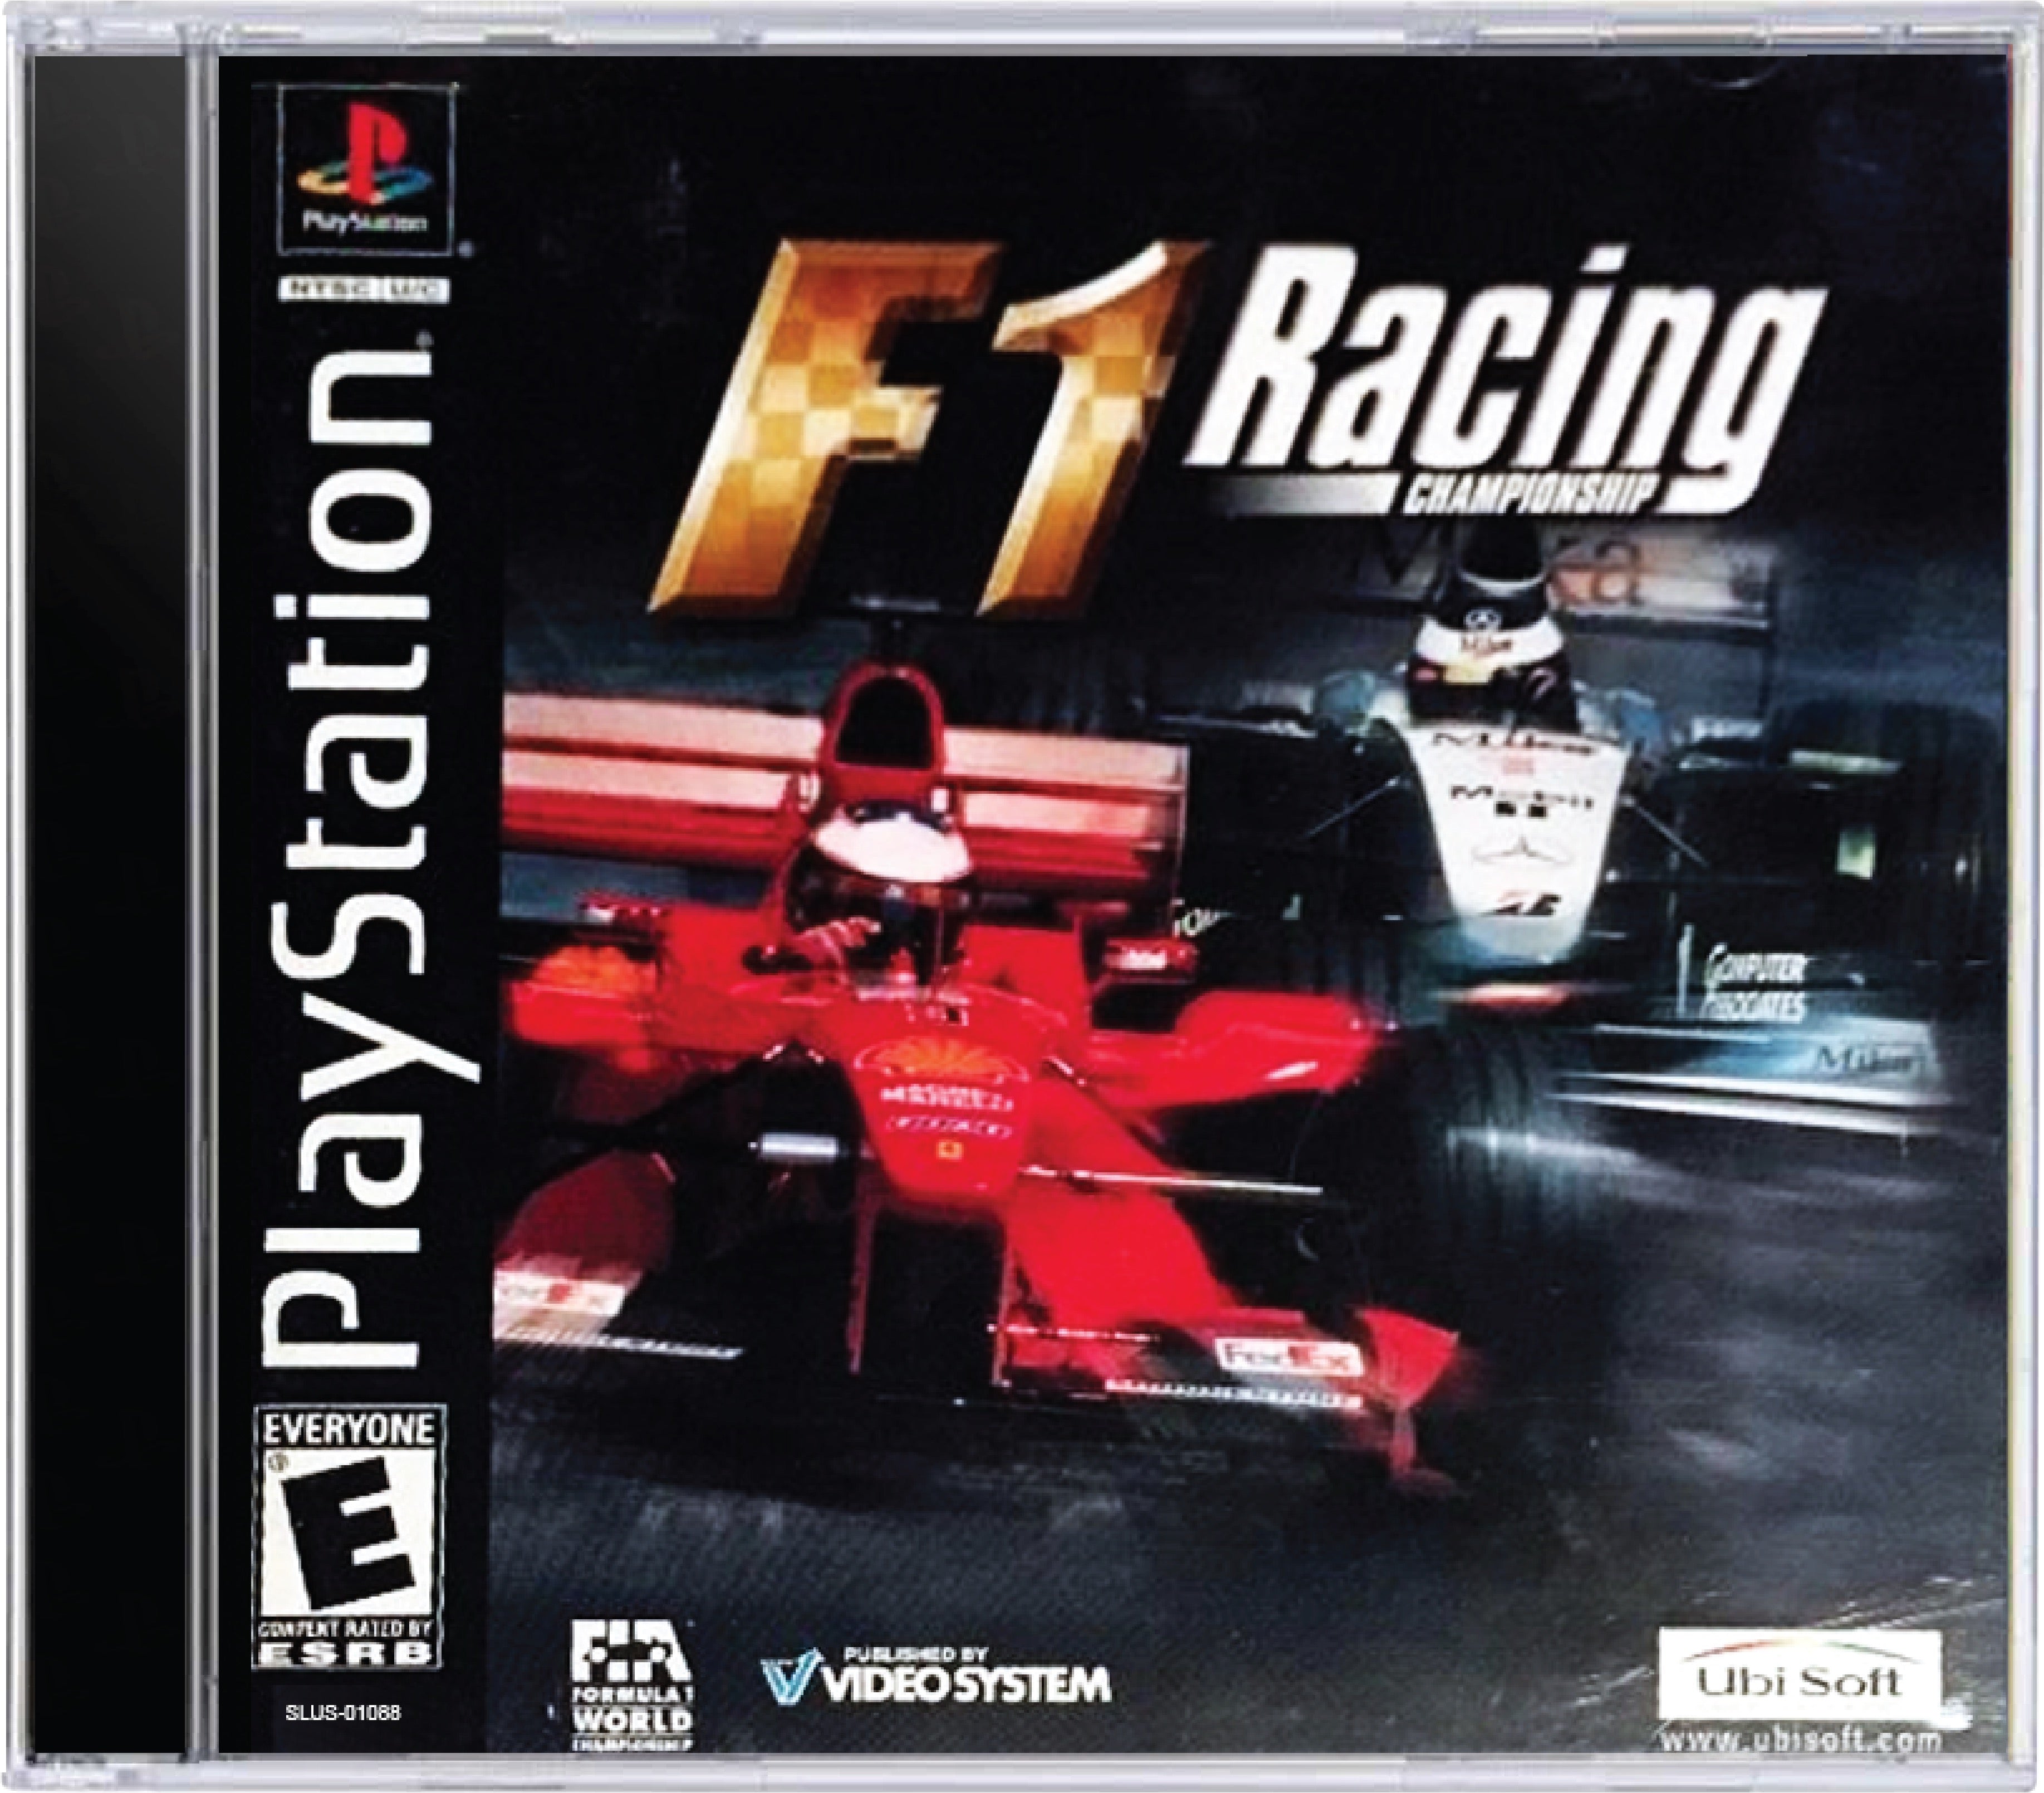 F1 Racing Championship Cover Art and Product Photo